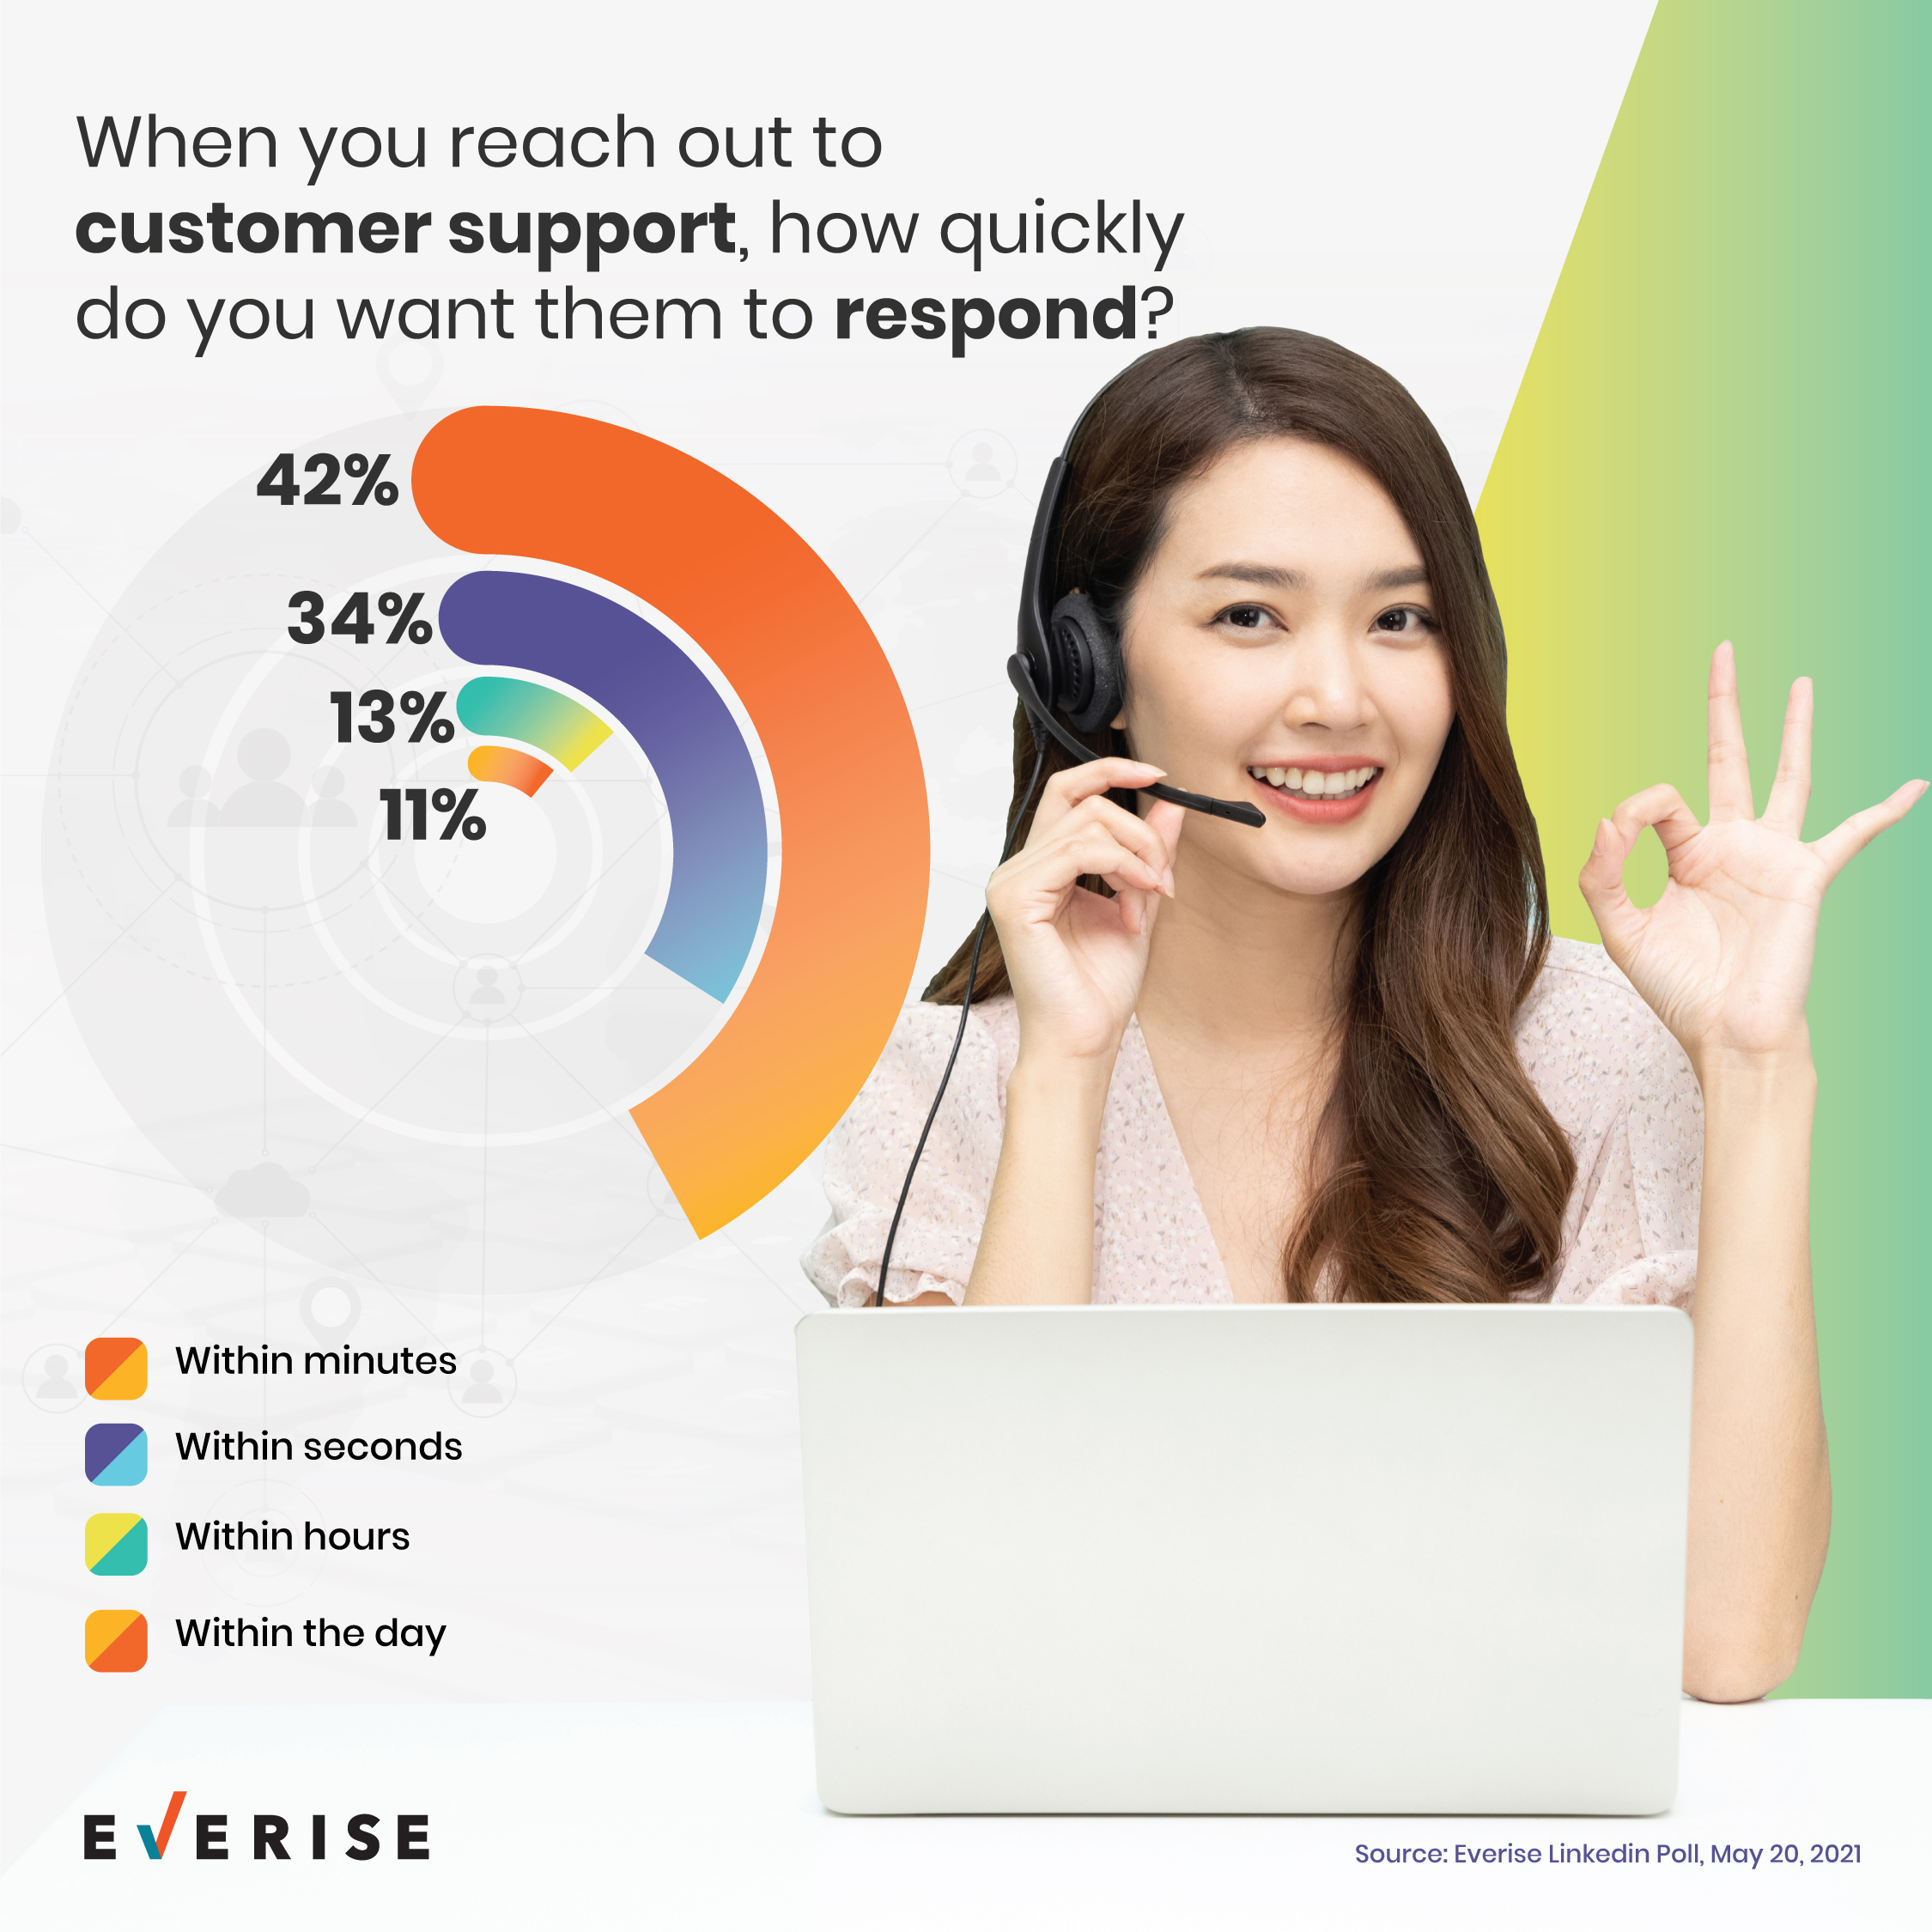 Response Speed Expectations for Customer Support